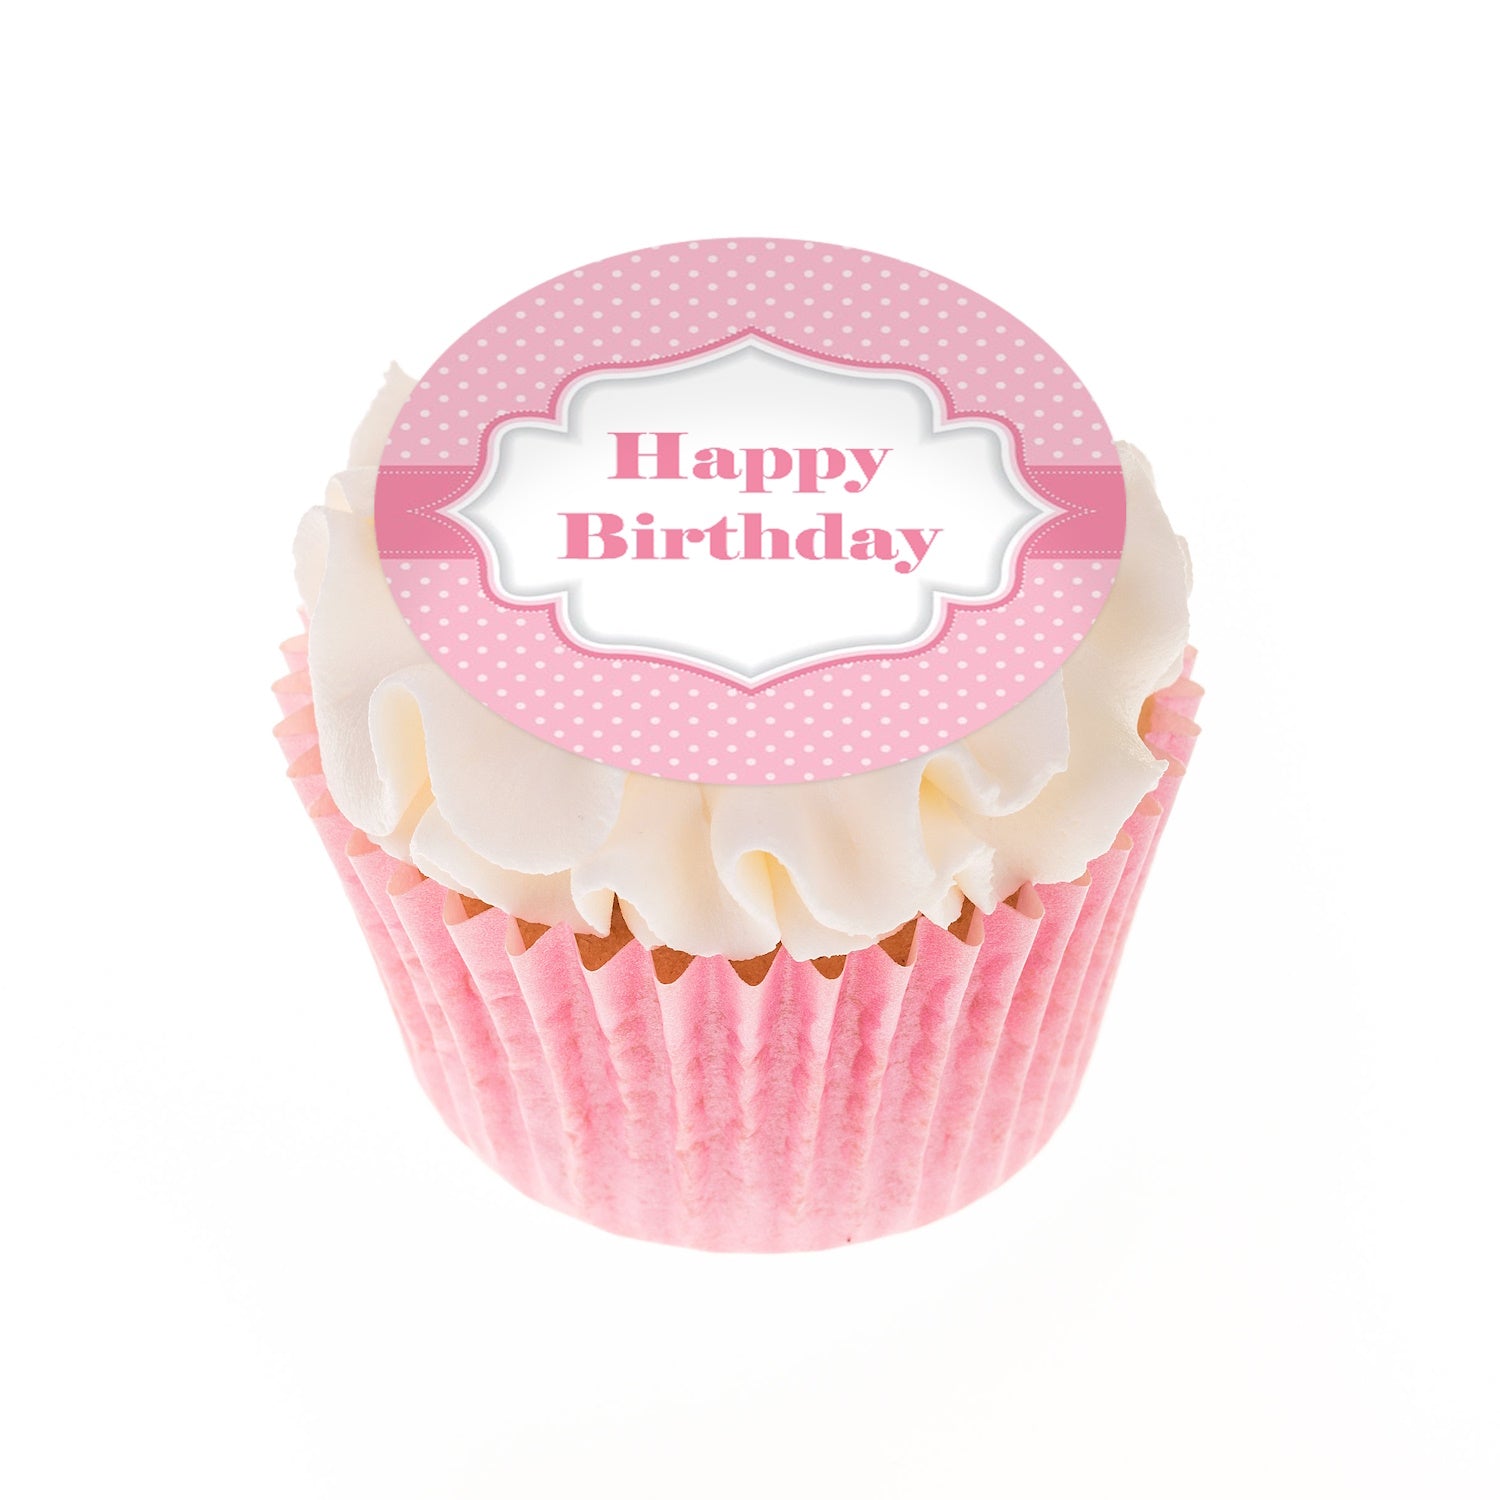 Edible birthday cupcake toppers - Happy Birthday message for 30th birthday